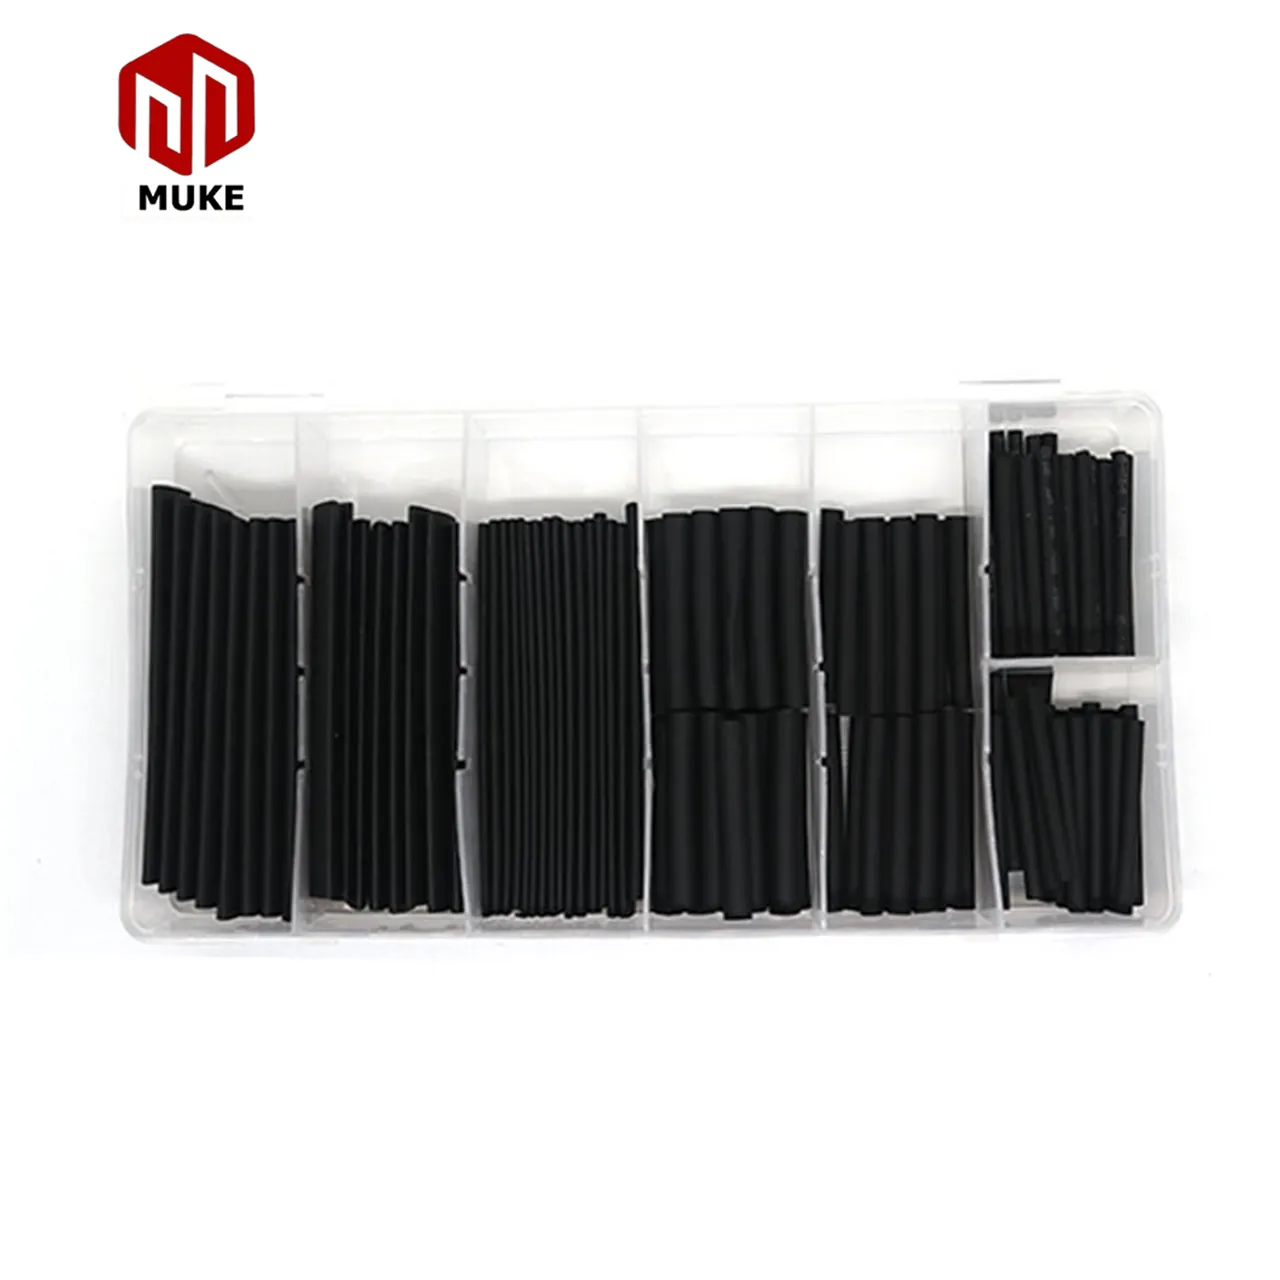 127PCS/BOX Heat Shrink Set Cable Repair Cover For Wires Gaine Thermo Heat Shrink Tube Black Box Shrinkable Tube